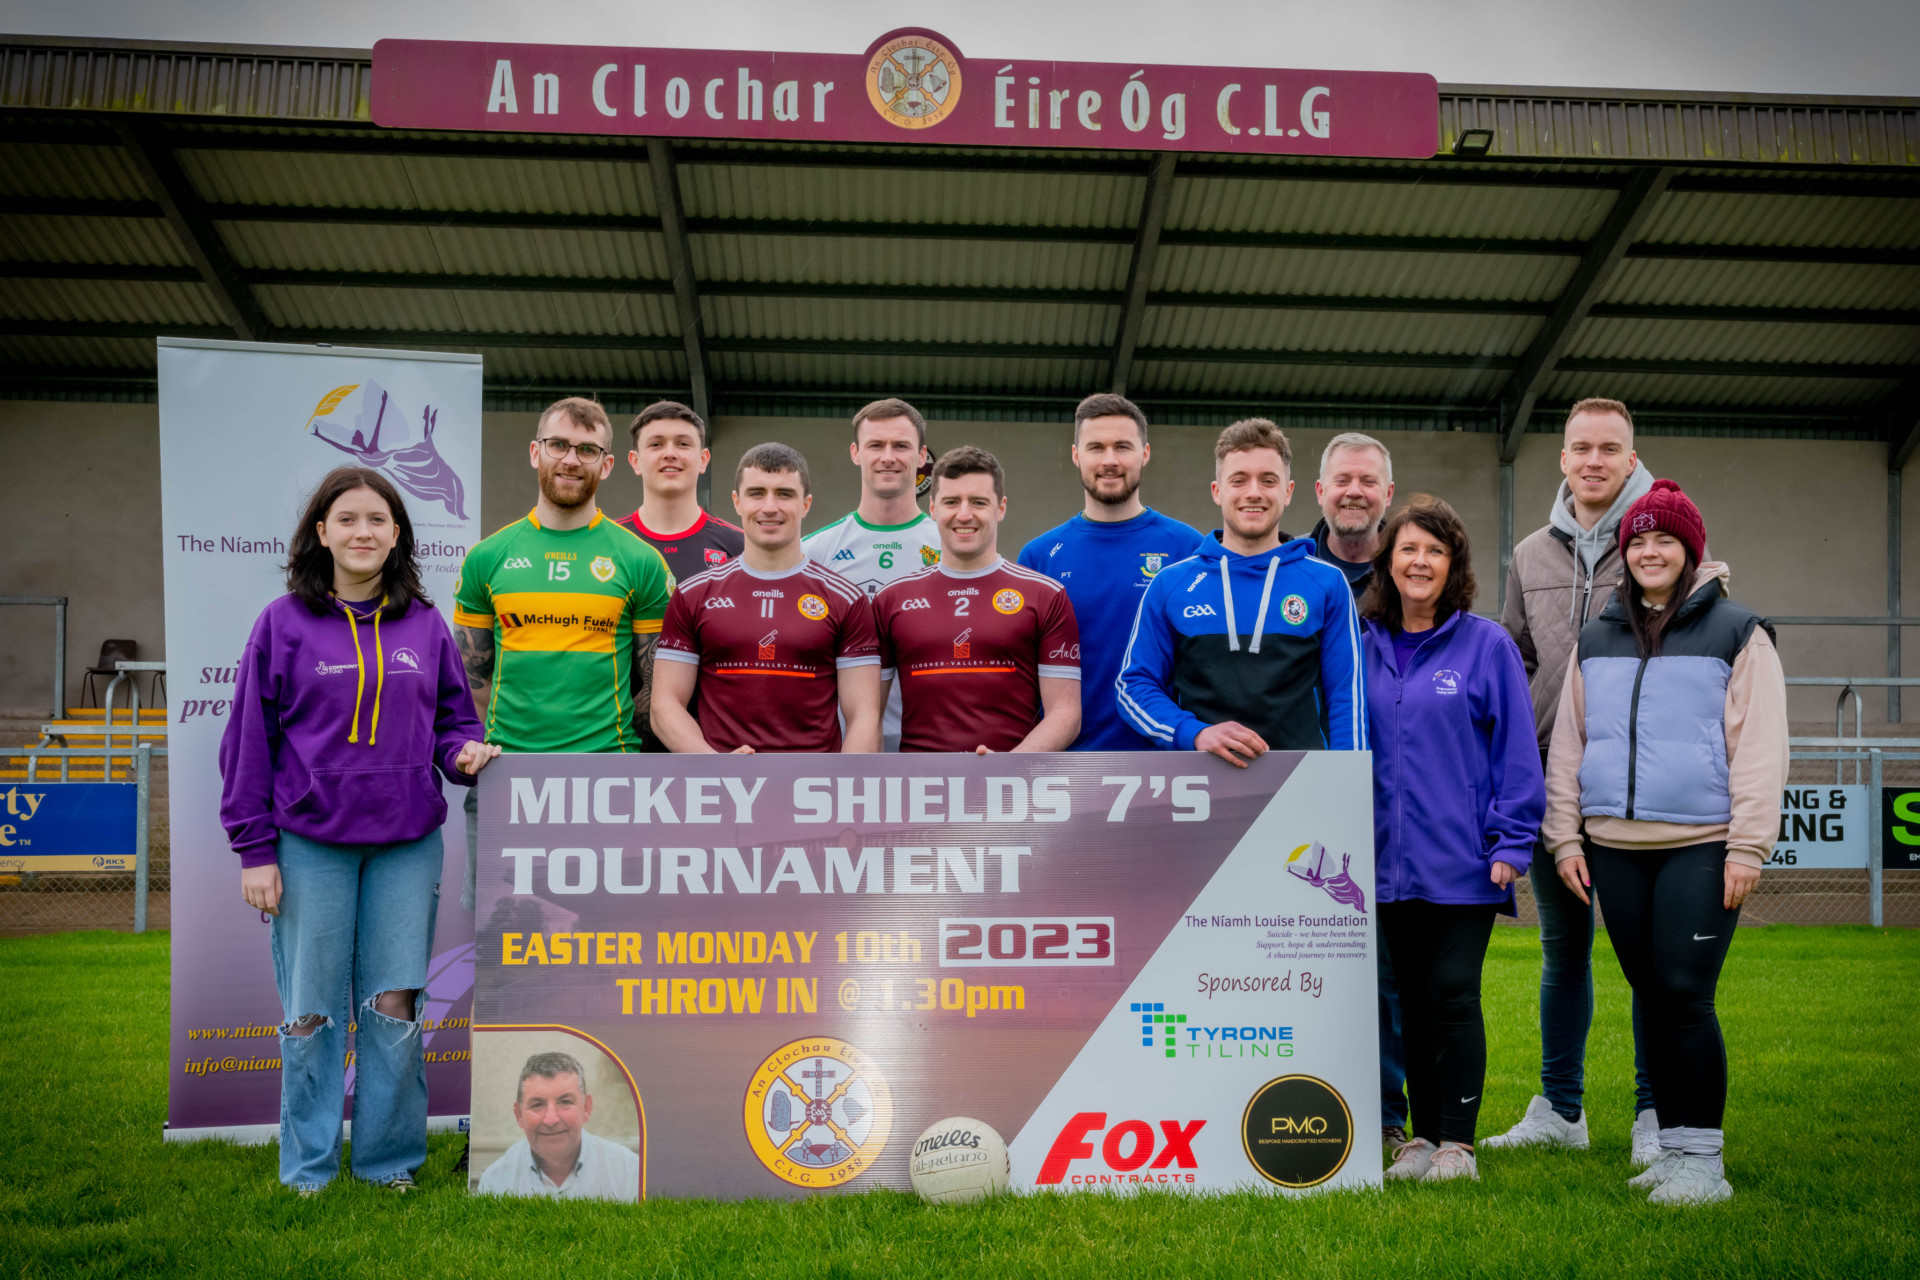 Clogher to host Mickey Shields Memorial 7s